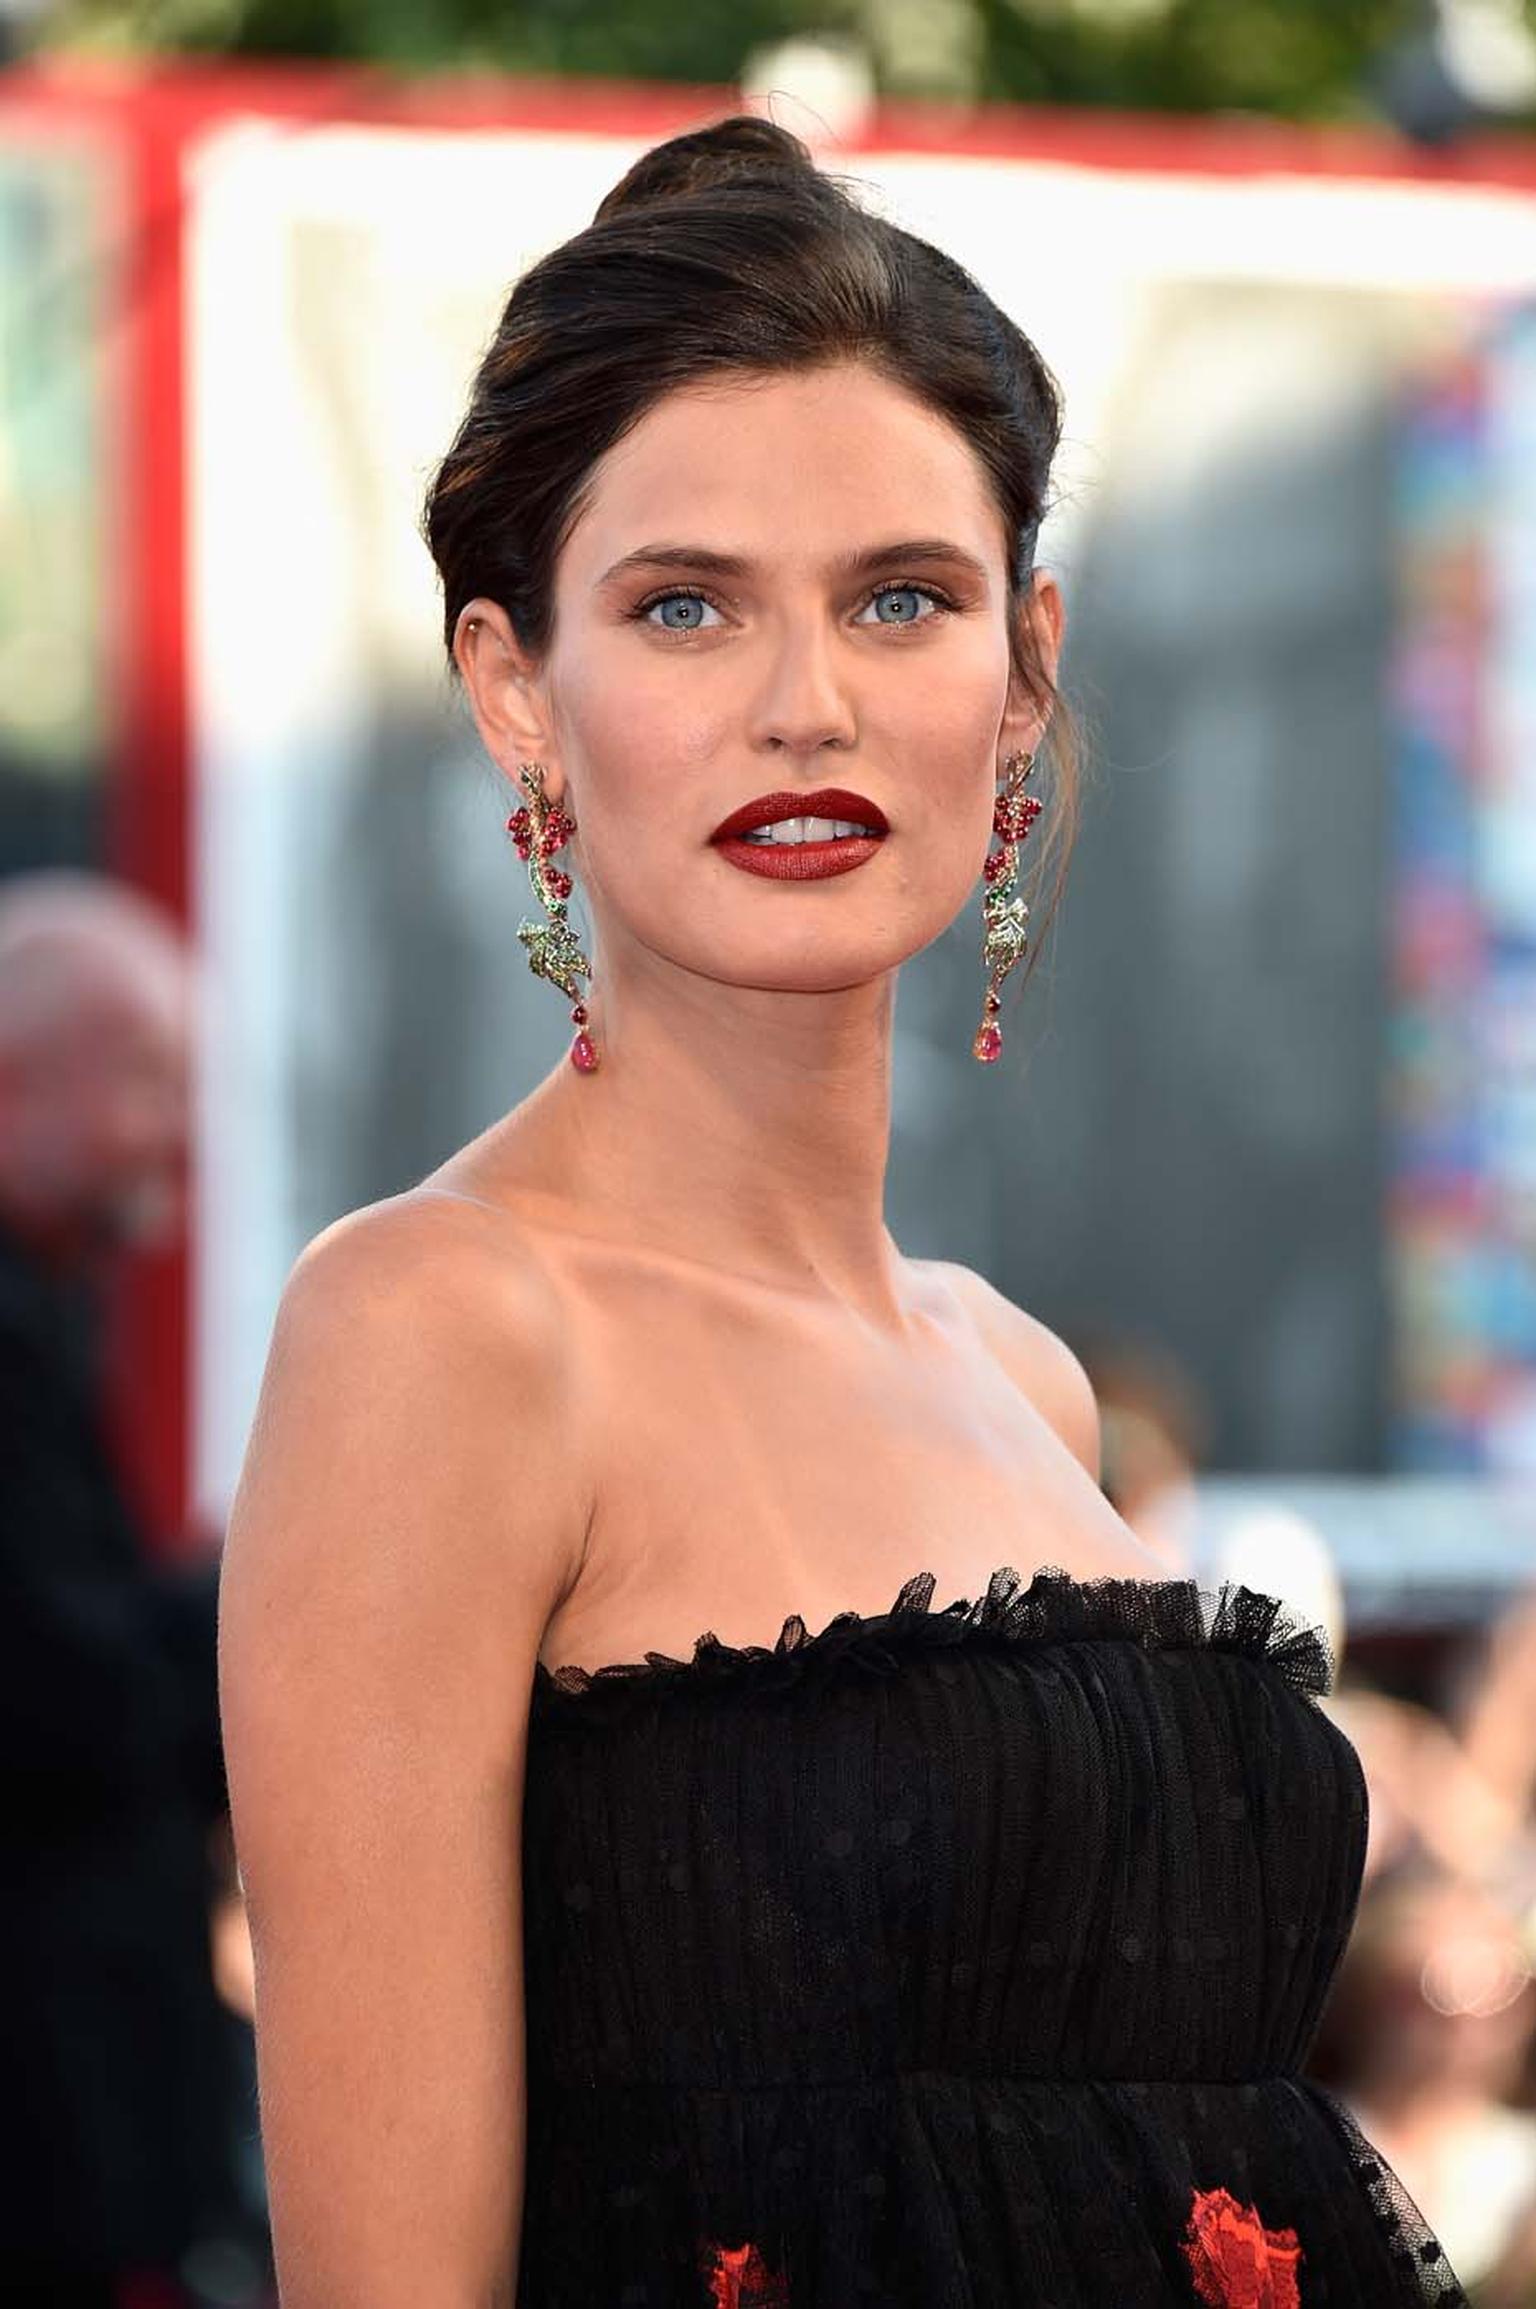 Italian model Bianca Balti wore a pair of Chopard Grape earrings from the Nature collection set with 19ct of cabochon spinels, 7ct of tsavorites and 3ct of coloured diamonds during the 71st Venice Film Festival.